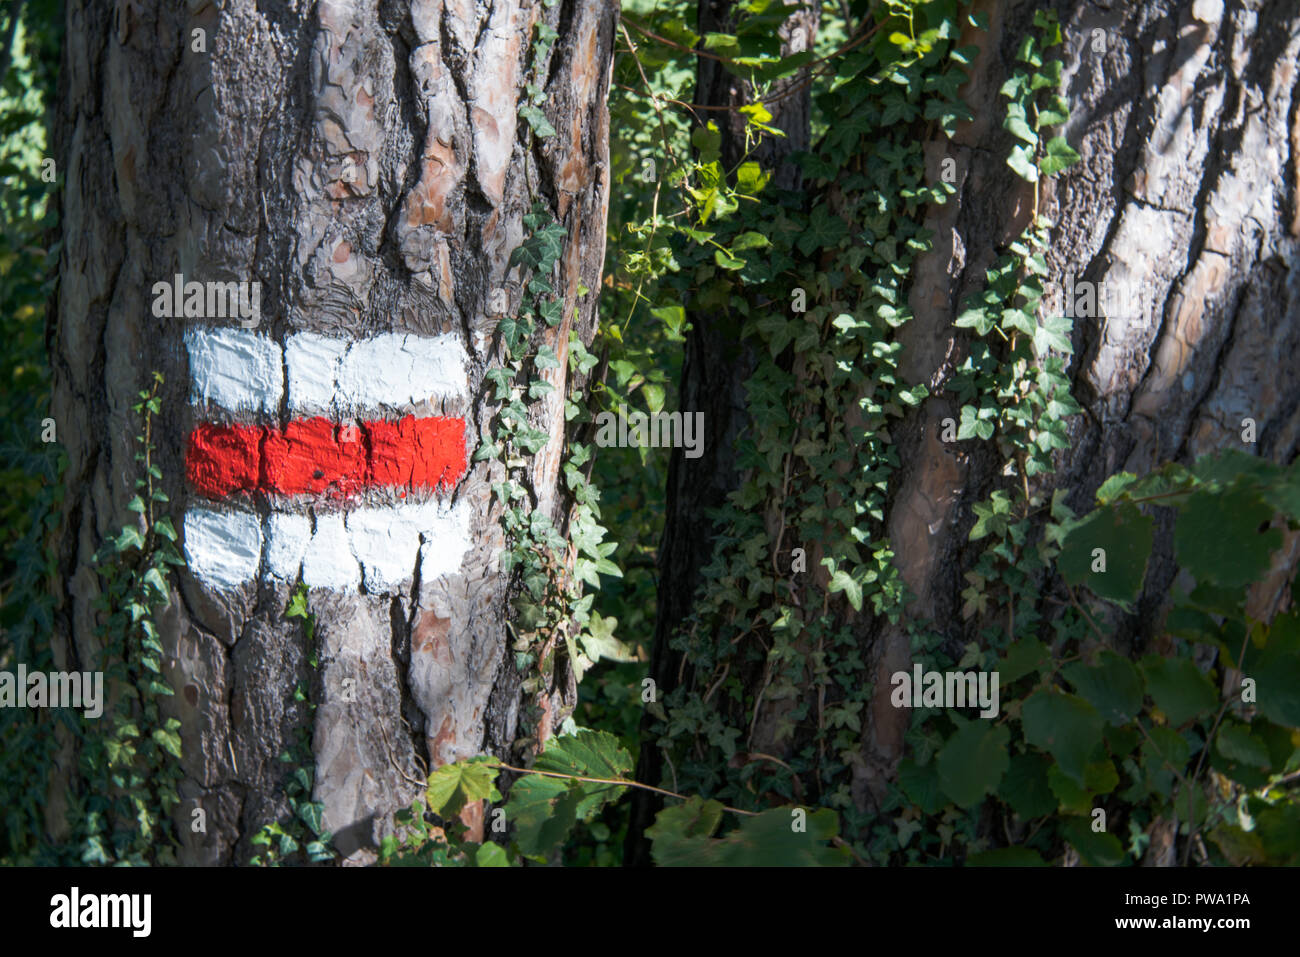 typical Swiss hiking trail marker in red and white painted on a tree Stock Photo